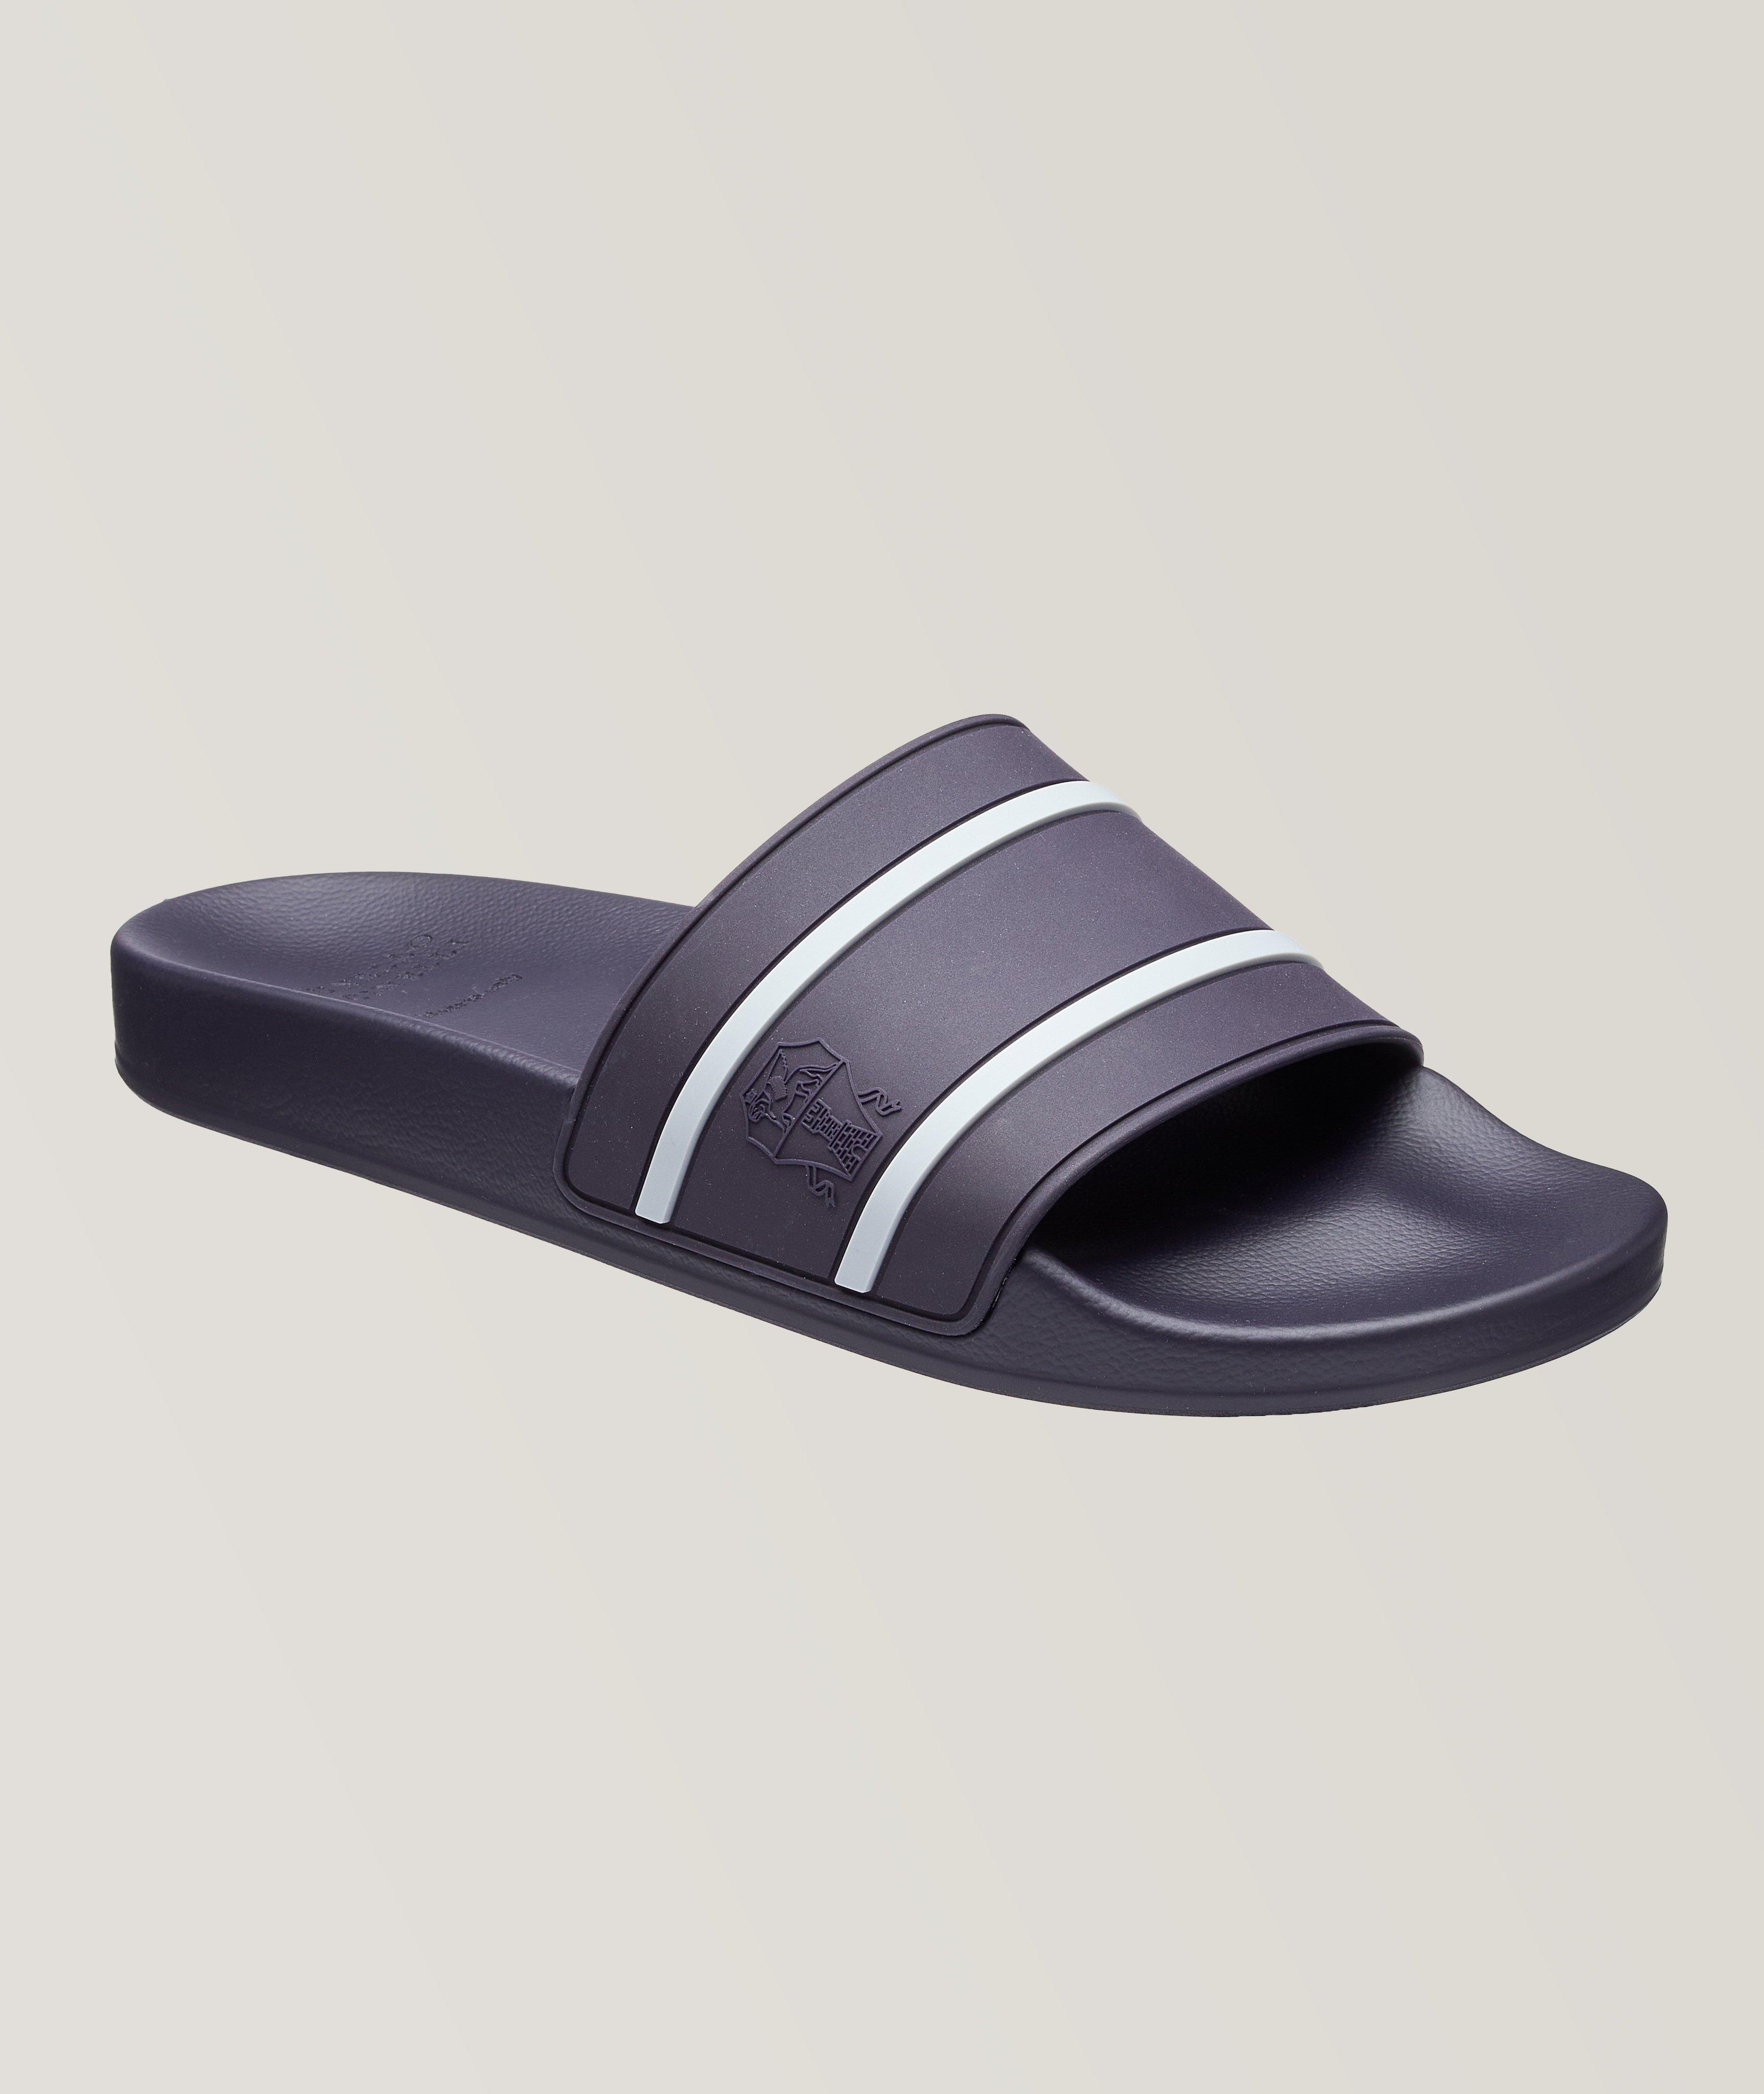 Brunello Cucinelli Striped Rubber Pool Slides | Casual Shoes | Harry Rosen